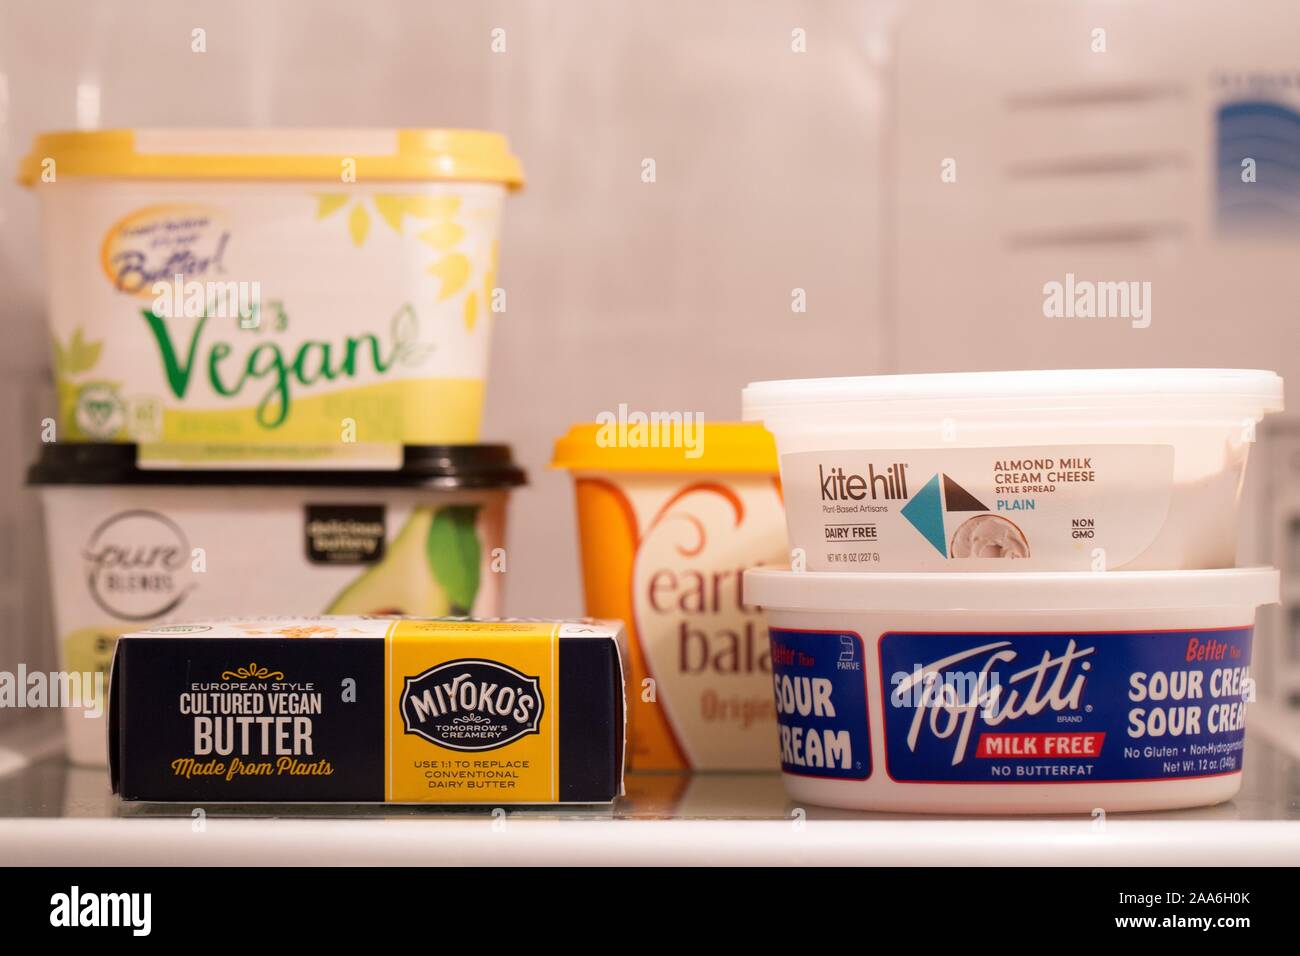 Vegan non-dairy products on a refrigerator shelf. Stock Photo